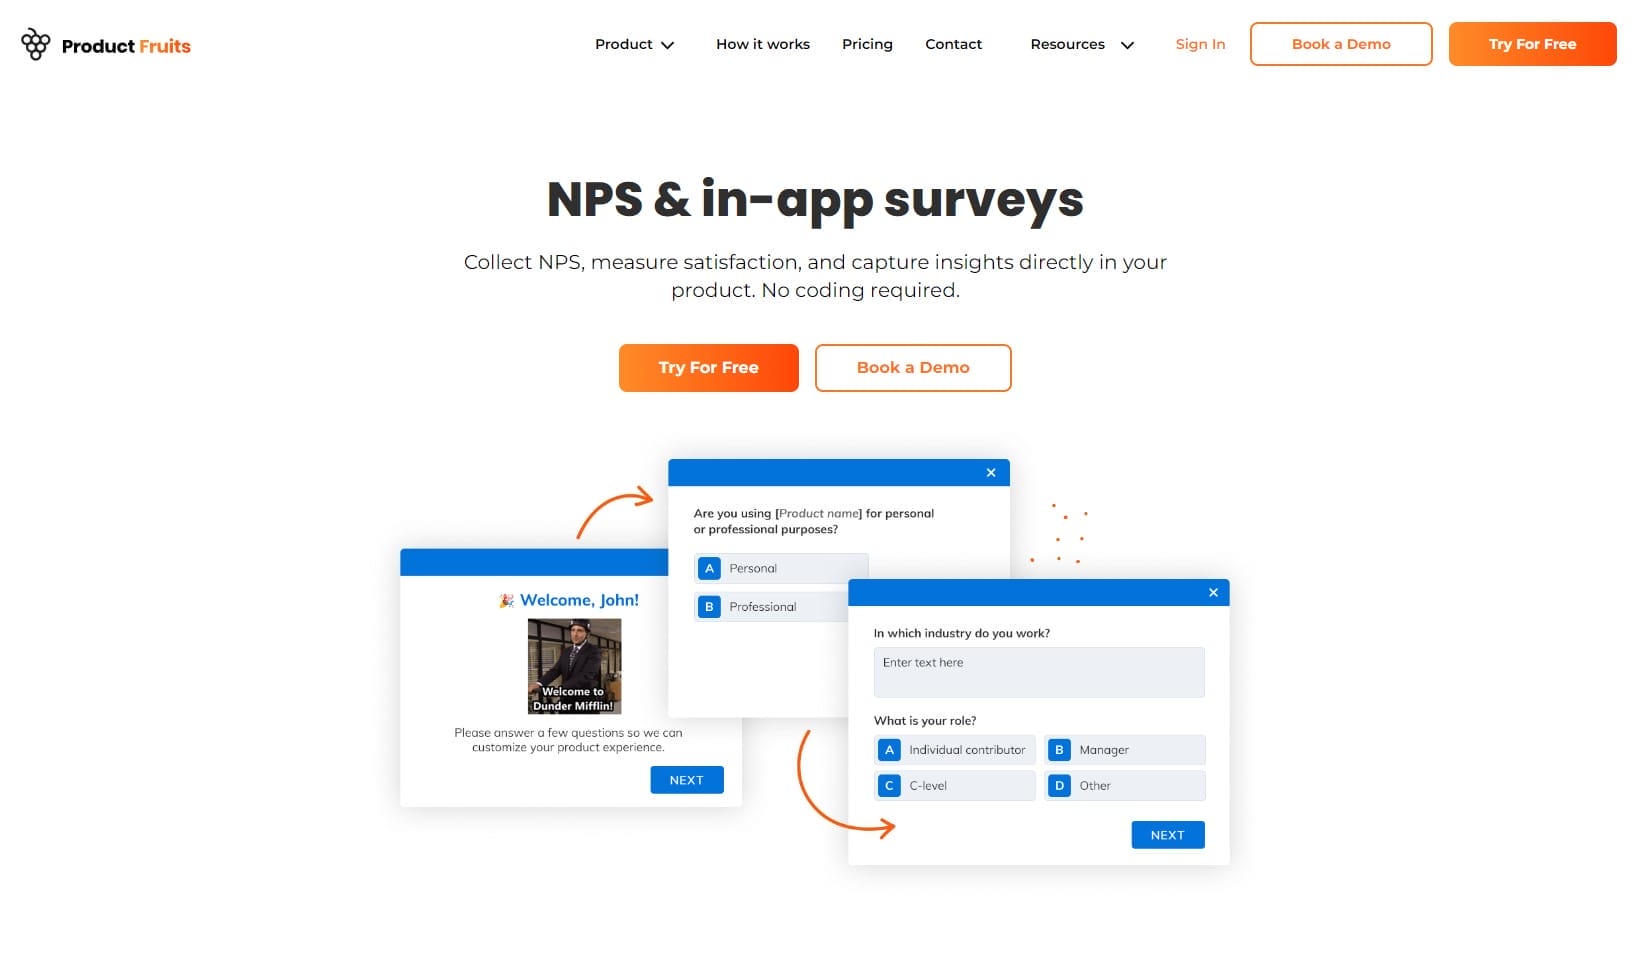 ProductFruit NPS in-app surveys for measuring and capturing customer insight.